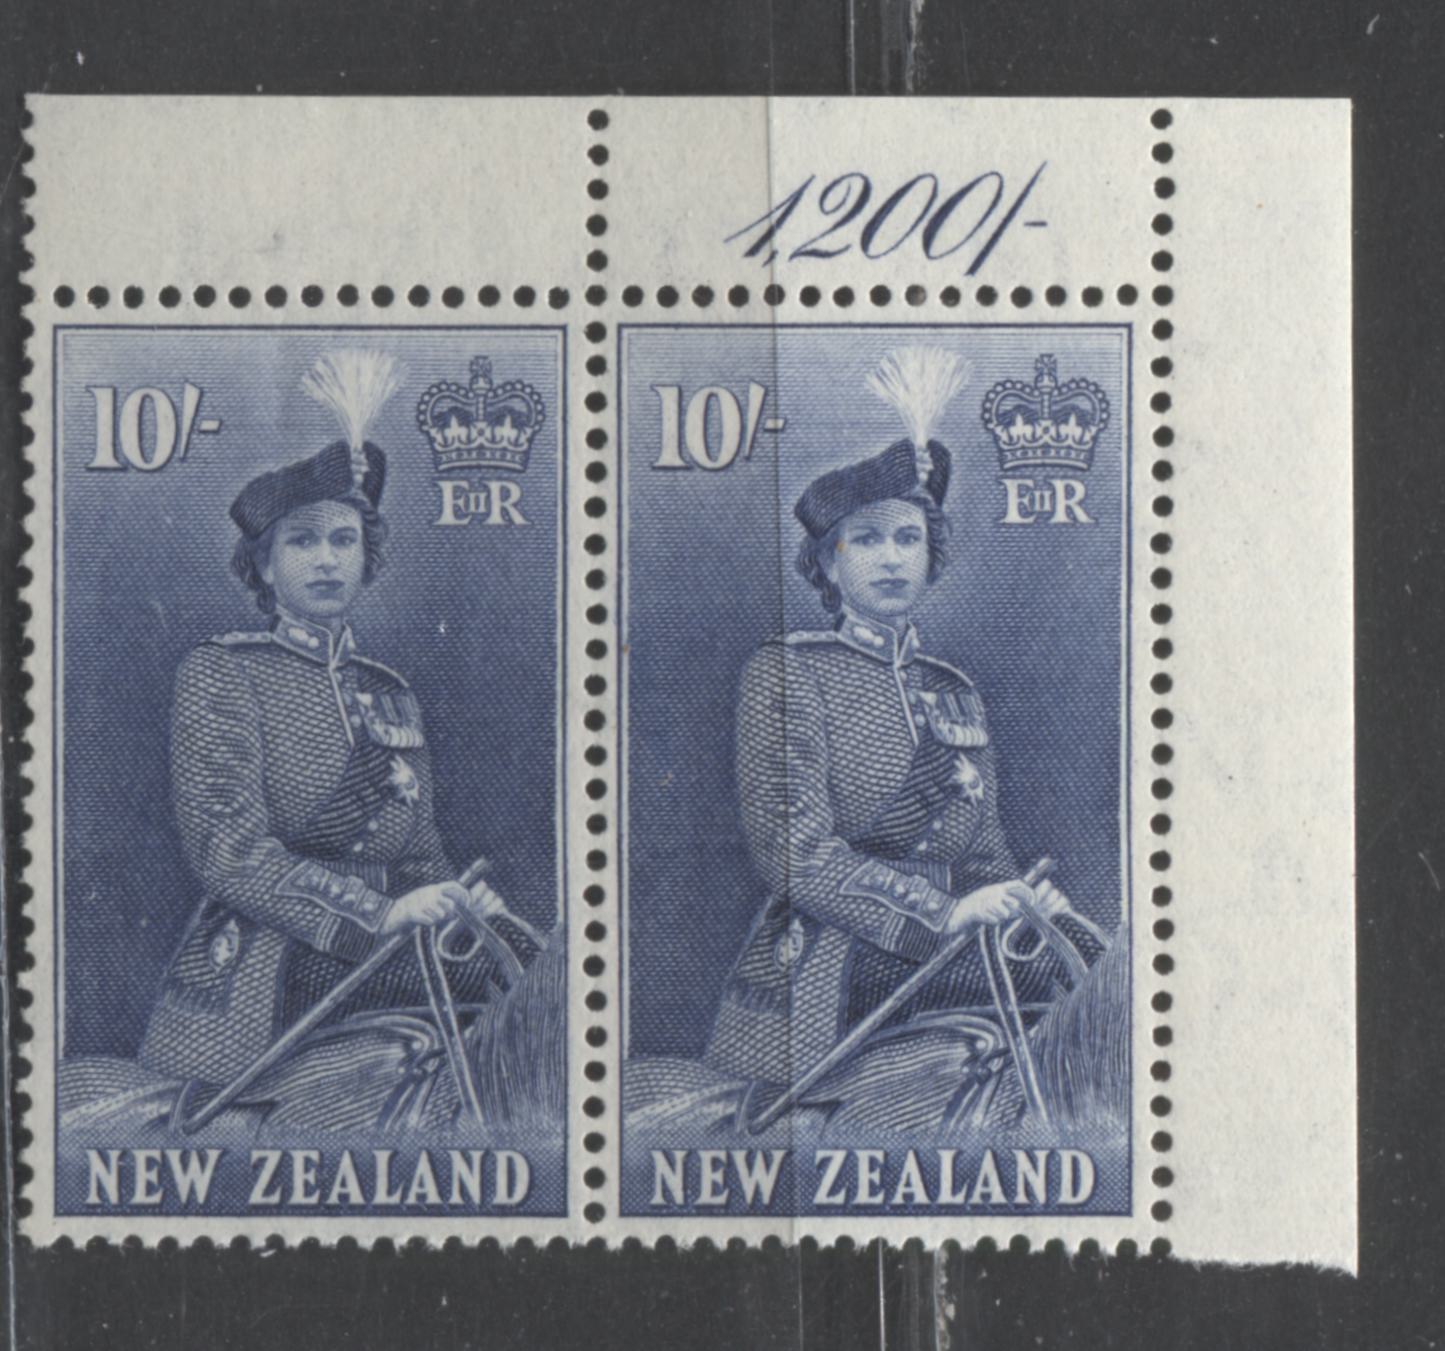 Lot 123 New Zealand SC#301 10/- Dark Blue Imprint Pair 1953-1957 Queen Elizabeth II Definitives, A VFNH Example, 2017 Scott Cat. $100 USD, Click on Listing to See ALL Pictures